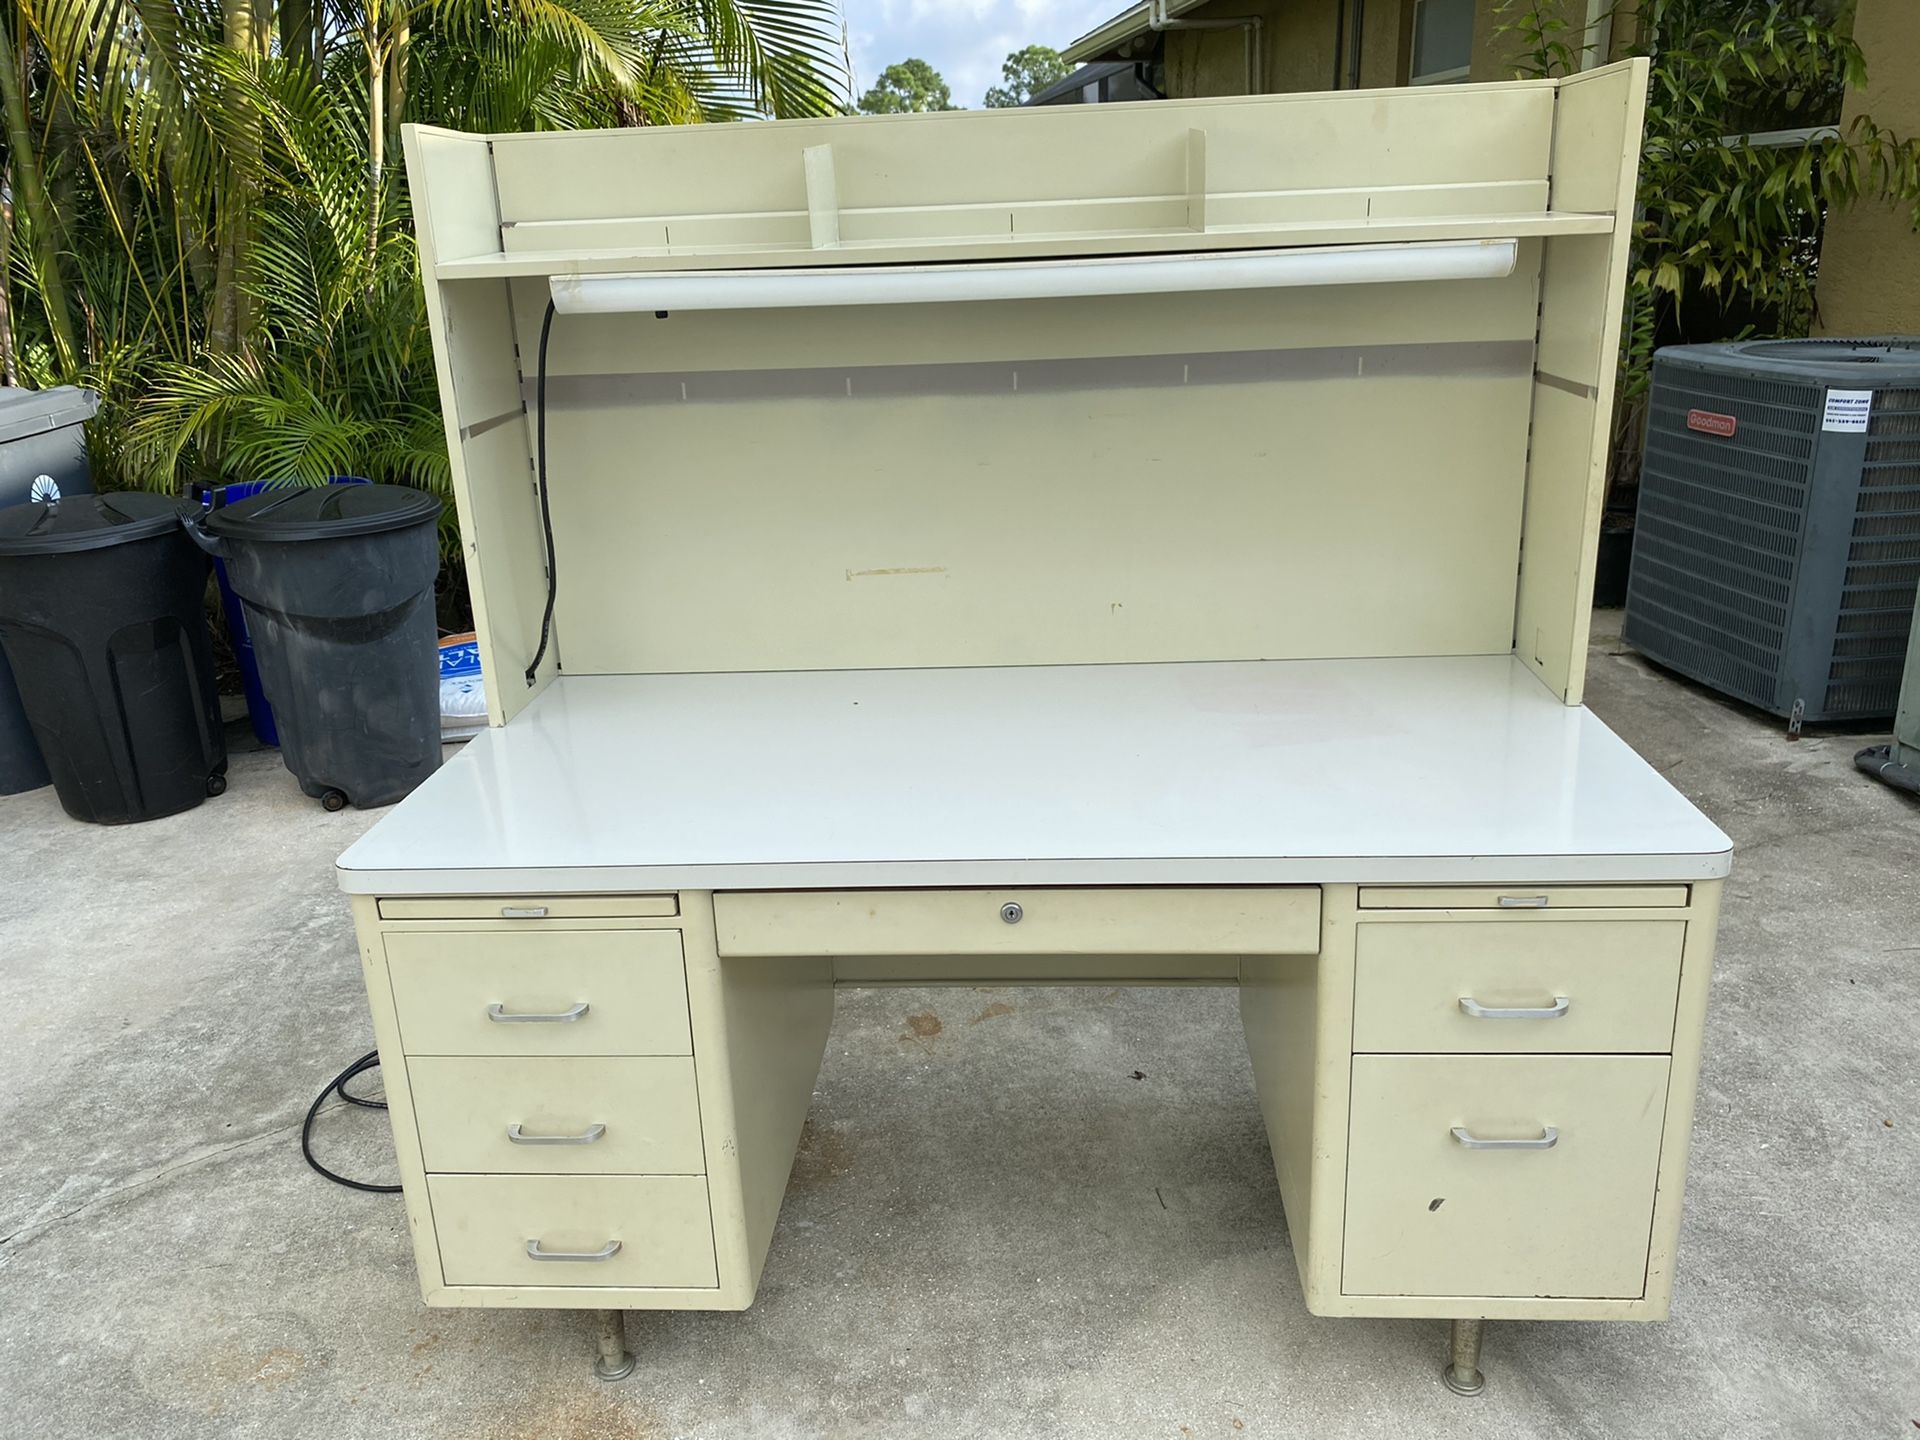 Steel desk 6 draws great shape with overhead light Also includes the credenza and file cabinet